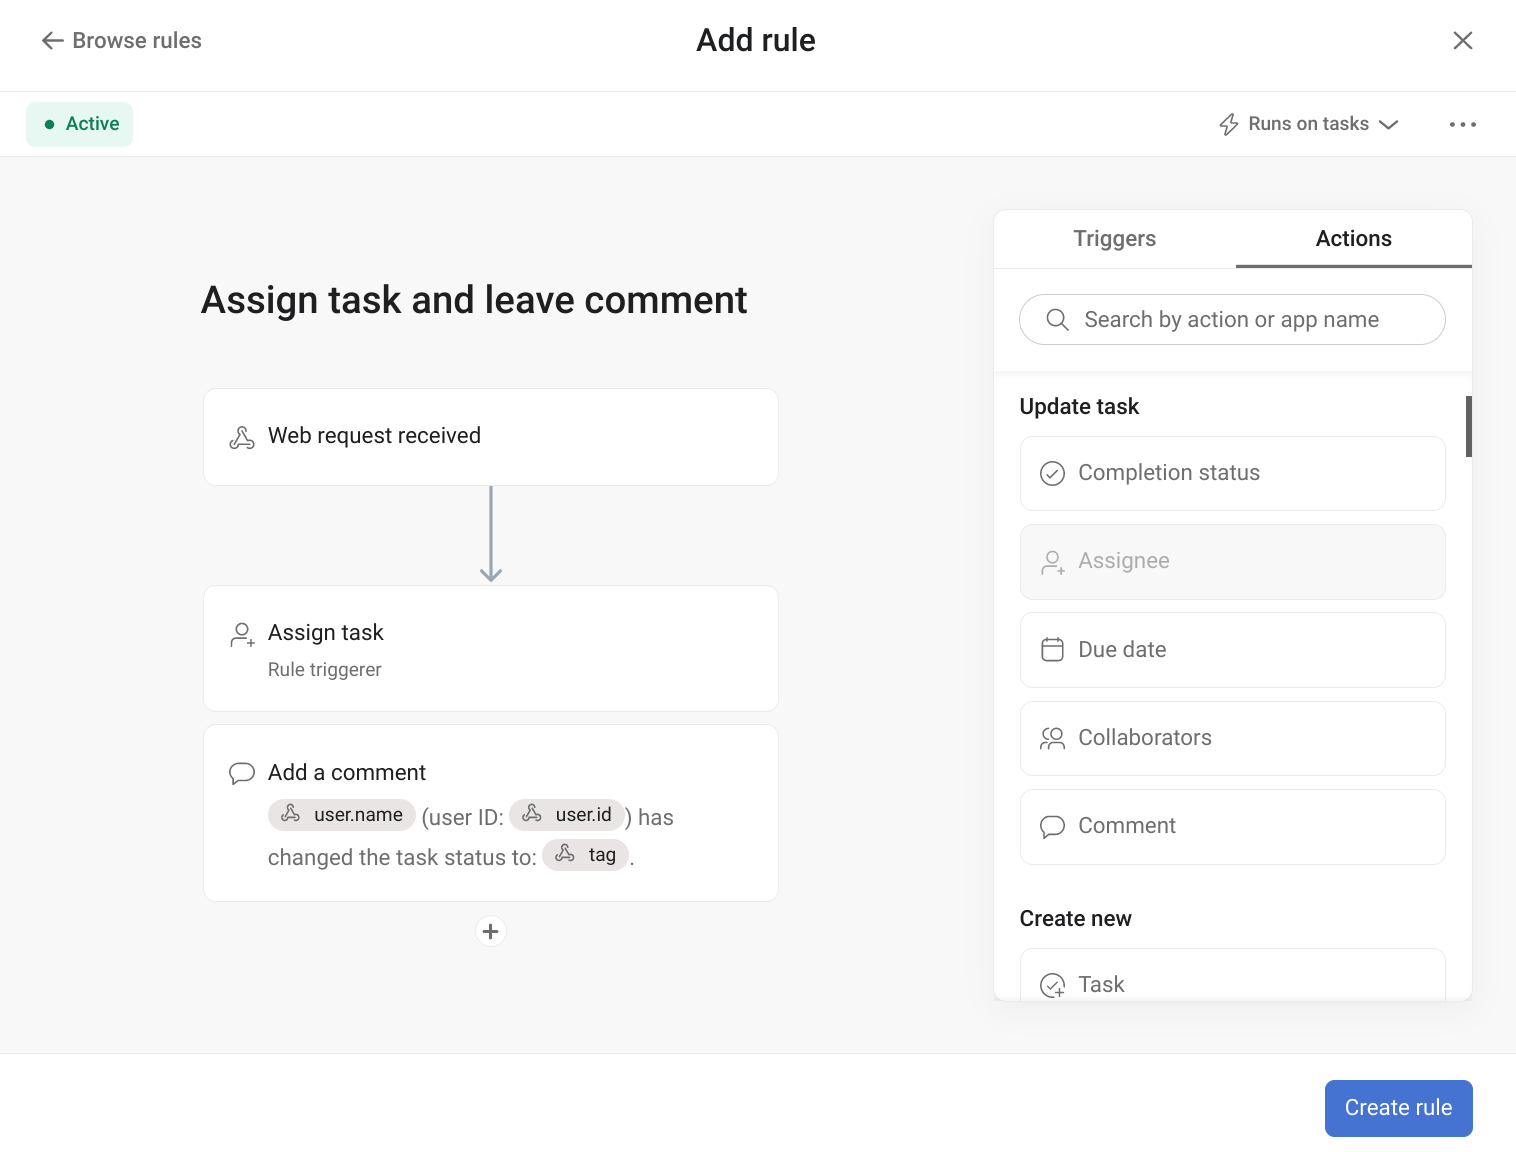 Incoming web requests allows you to build a low-code integration using Asana rules.